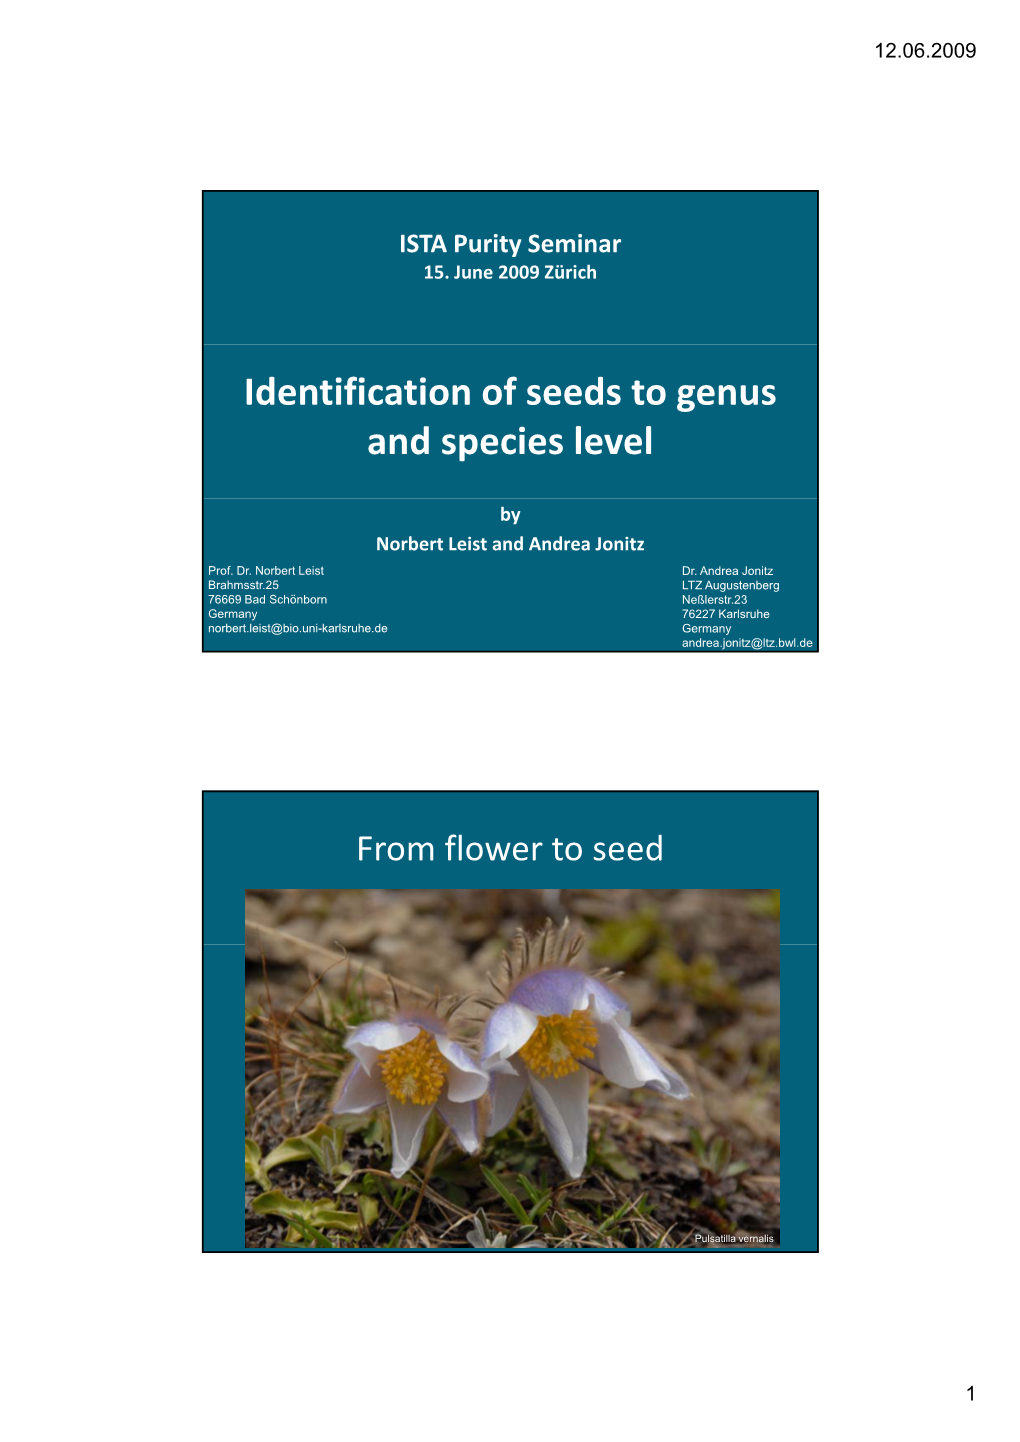 Identification of Seeds to Genus and Species Level